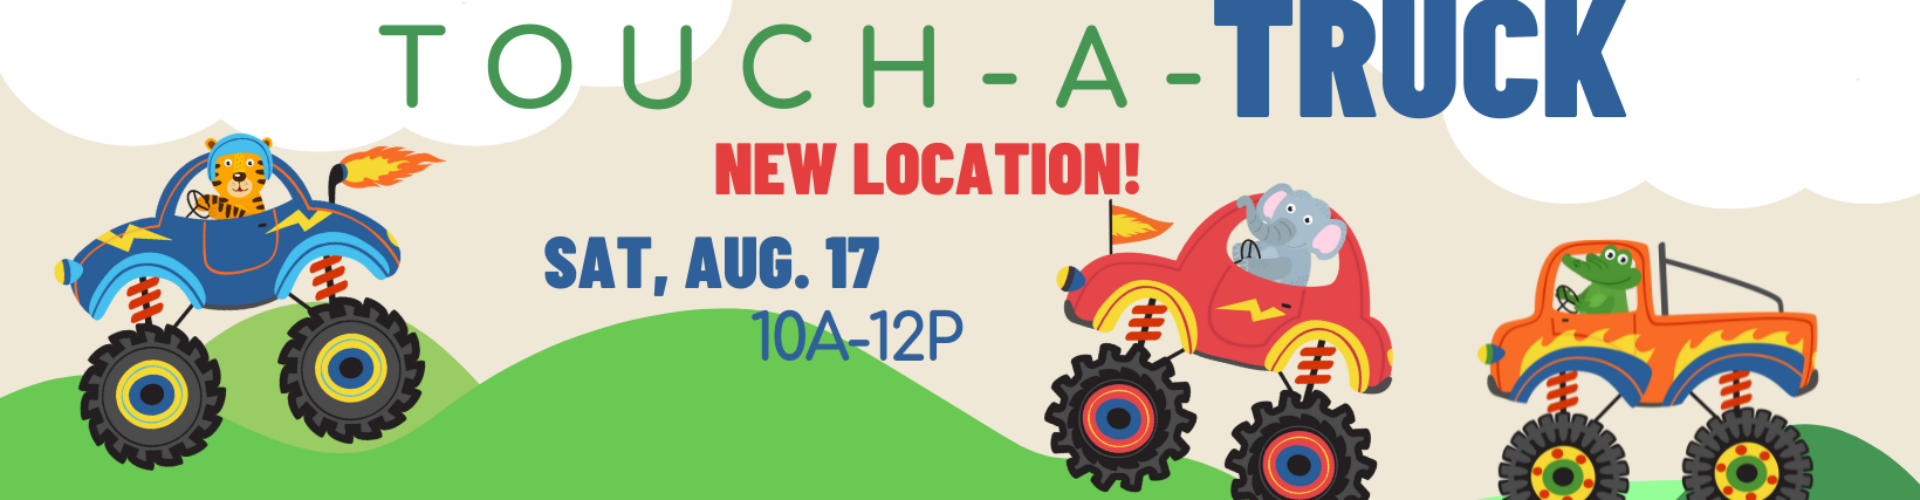 Touch-a-truck advertisement. New location. Saturday August 17, 10AM -12PM